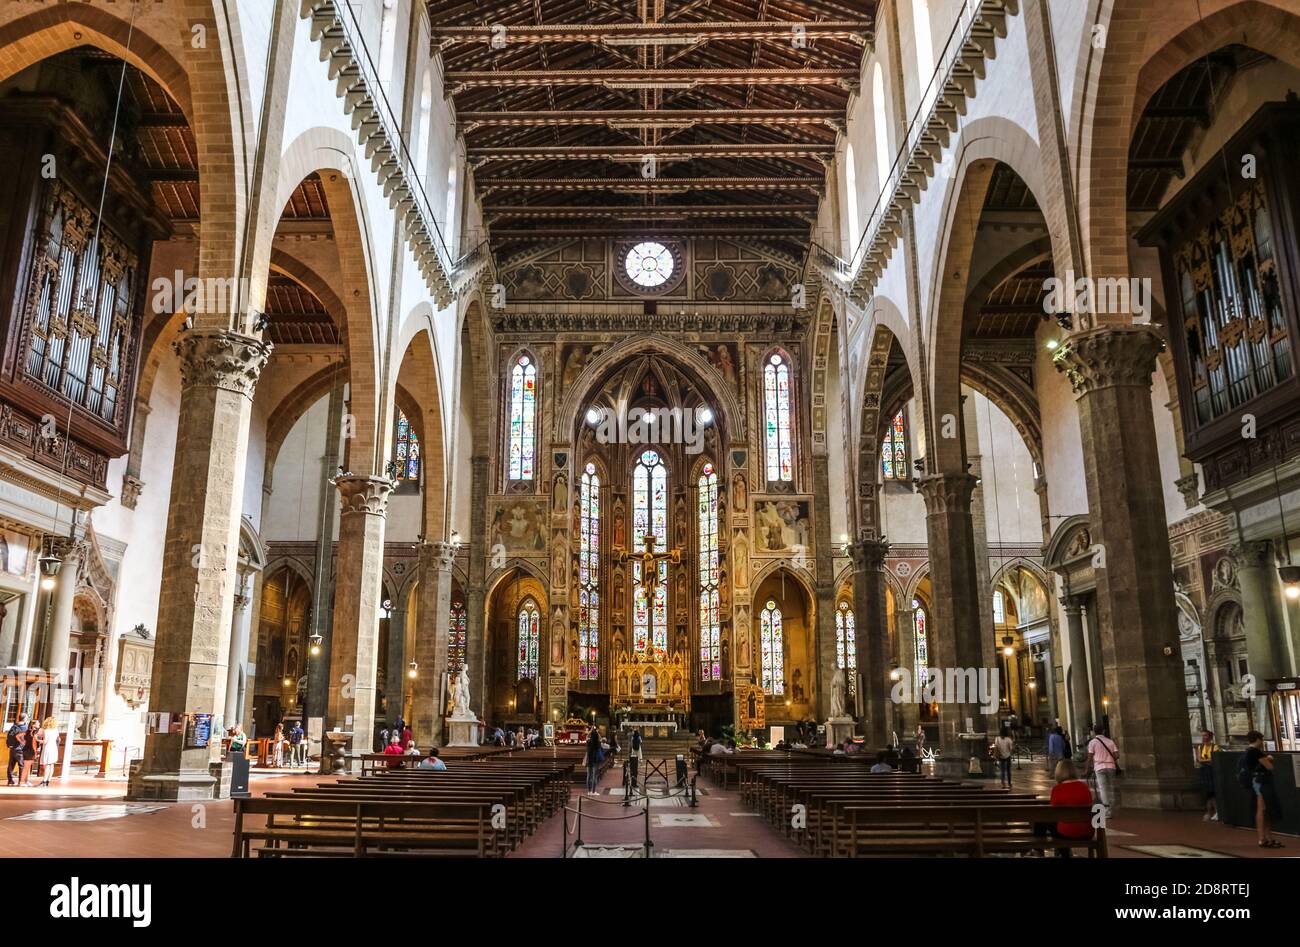 Lovely view from the nave to the transept, chancel and apse with the main chapel inside the famous Basilica of Santa Croce in Florence, Tuscany, Italy. Stock Photo